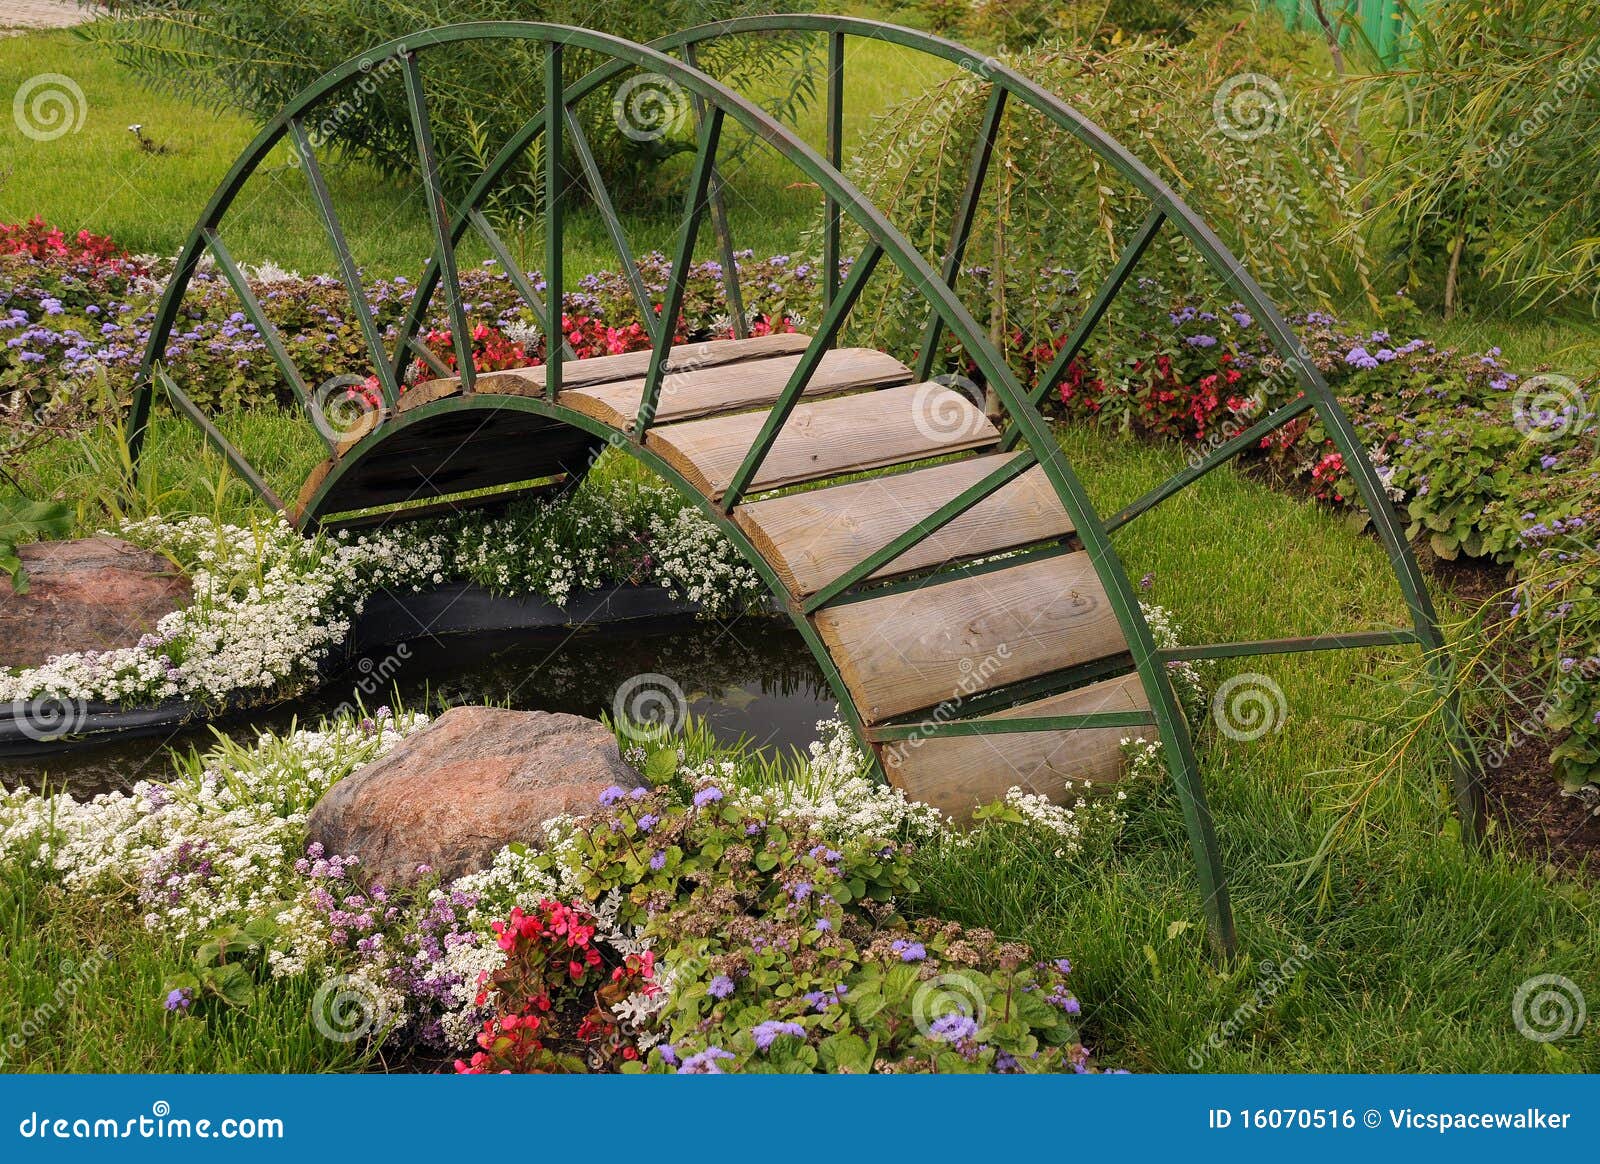 Garden arched bridge, little artificial pond and flowers in the garden ...